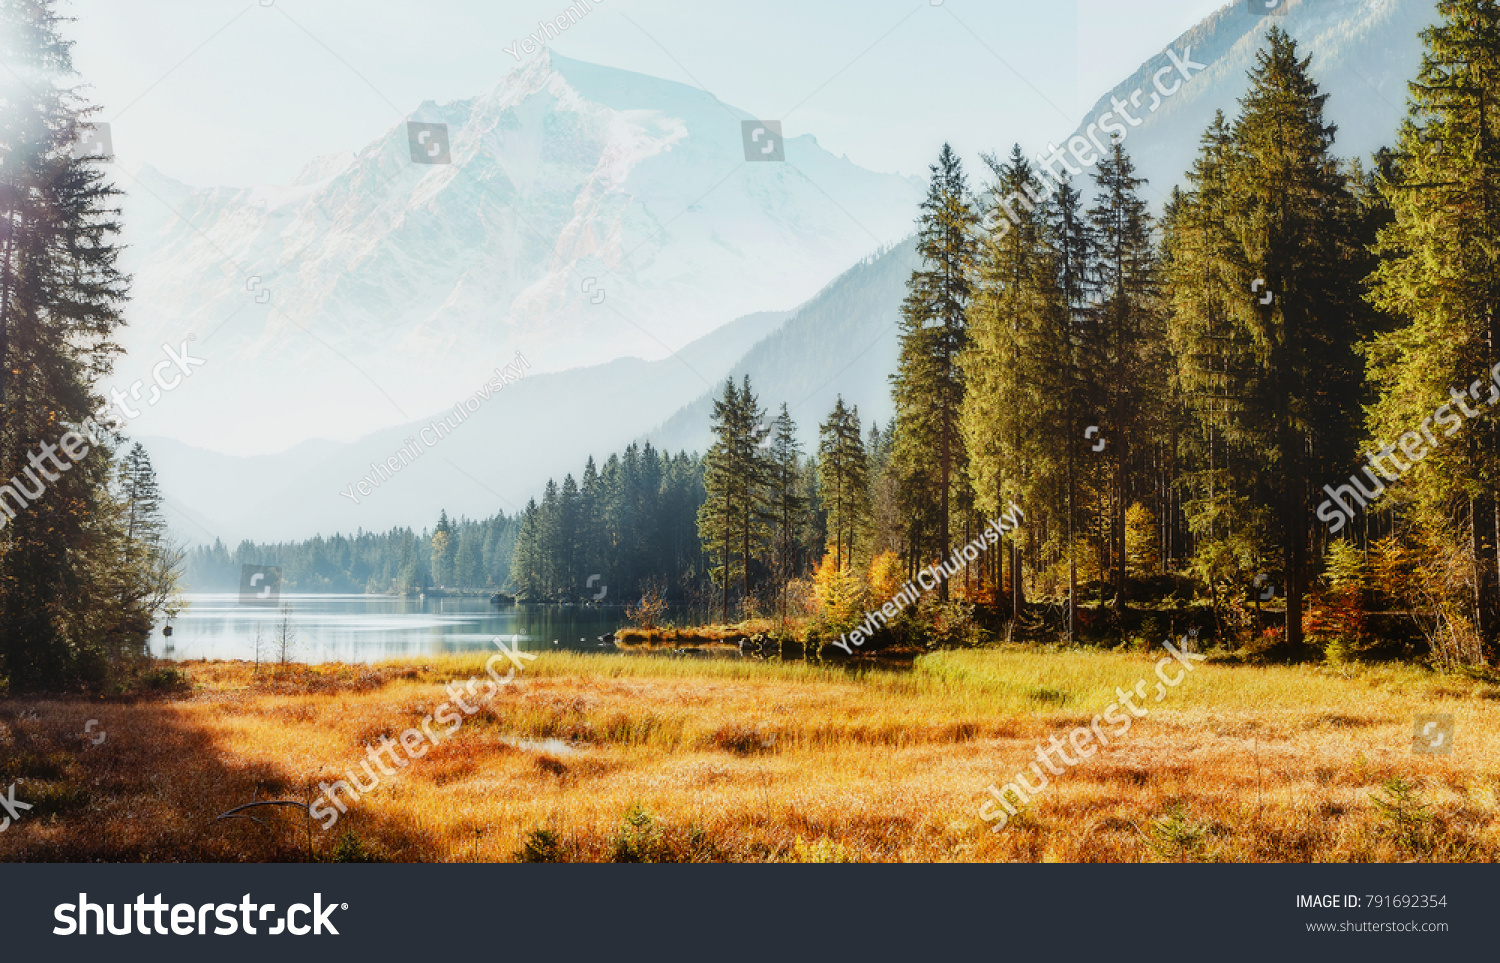 Awesome alpine highlands in sunny day. Scenic image of fairy-tale Landscape in sunlit with Majestic Rock Mountain on background. Wild area. Hintersee lake. Germany.  Bavaria, Alps. Creative image #791692354